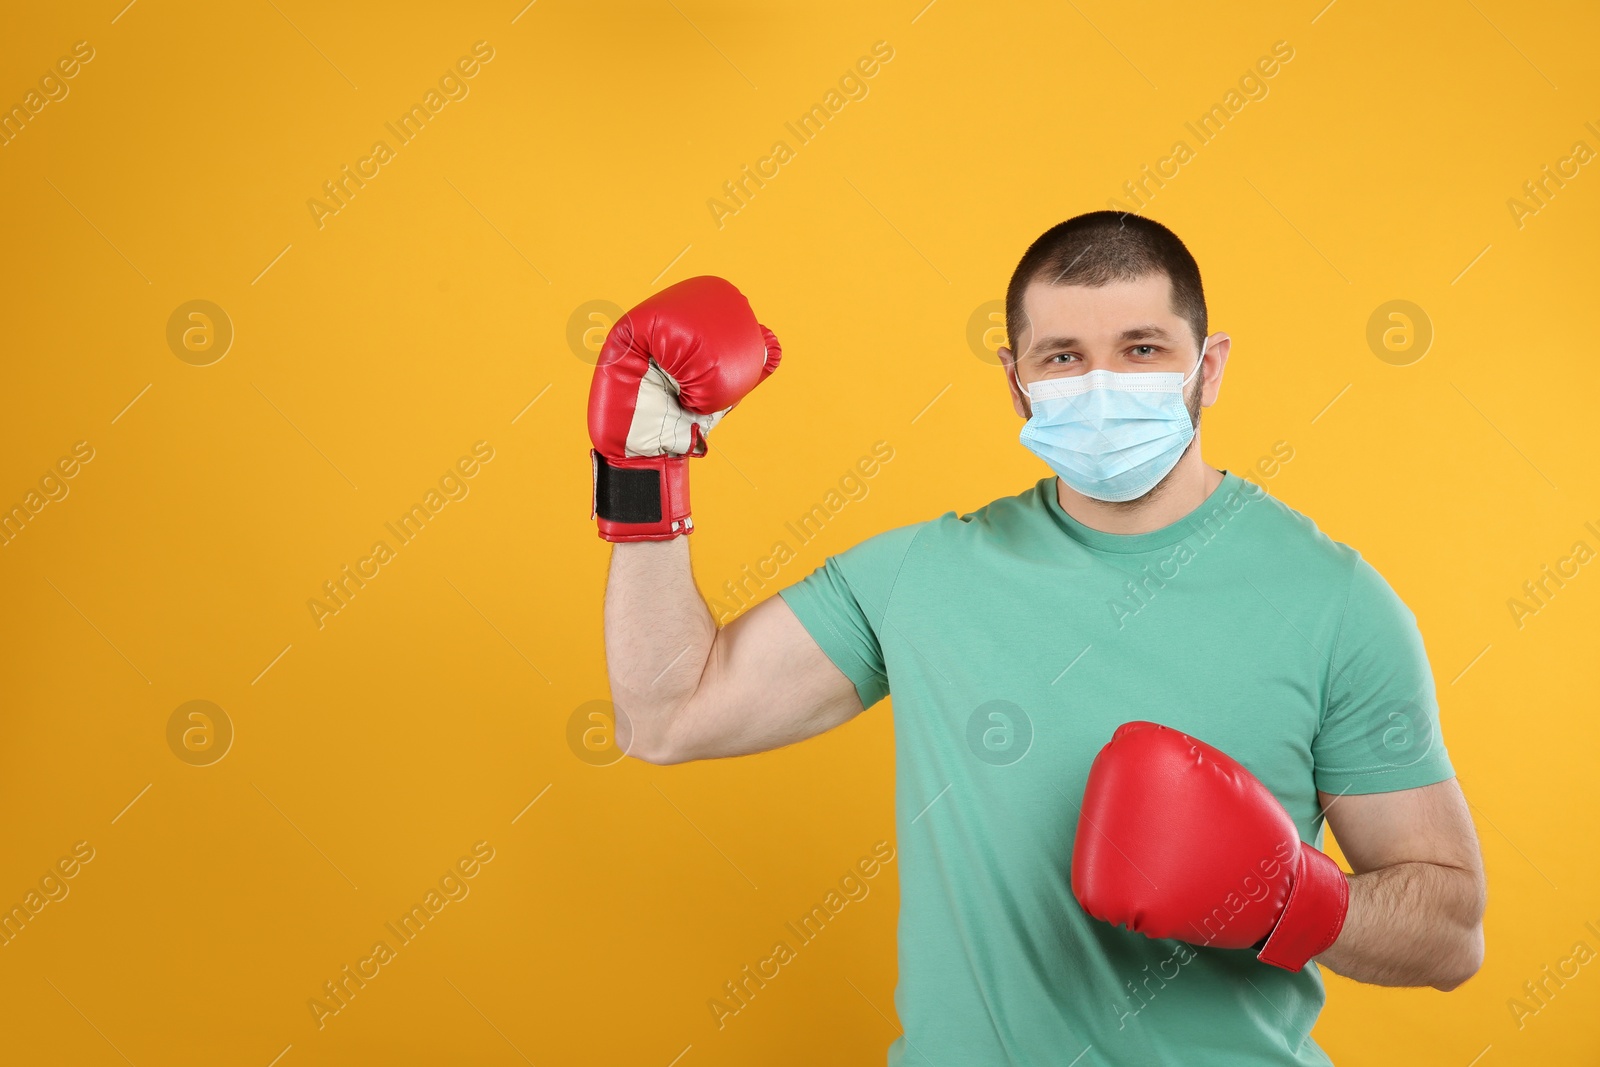 Photo of Man with protective mask and boxing gloves on yellow background, space for text. Strong immunity concept